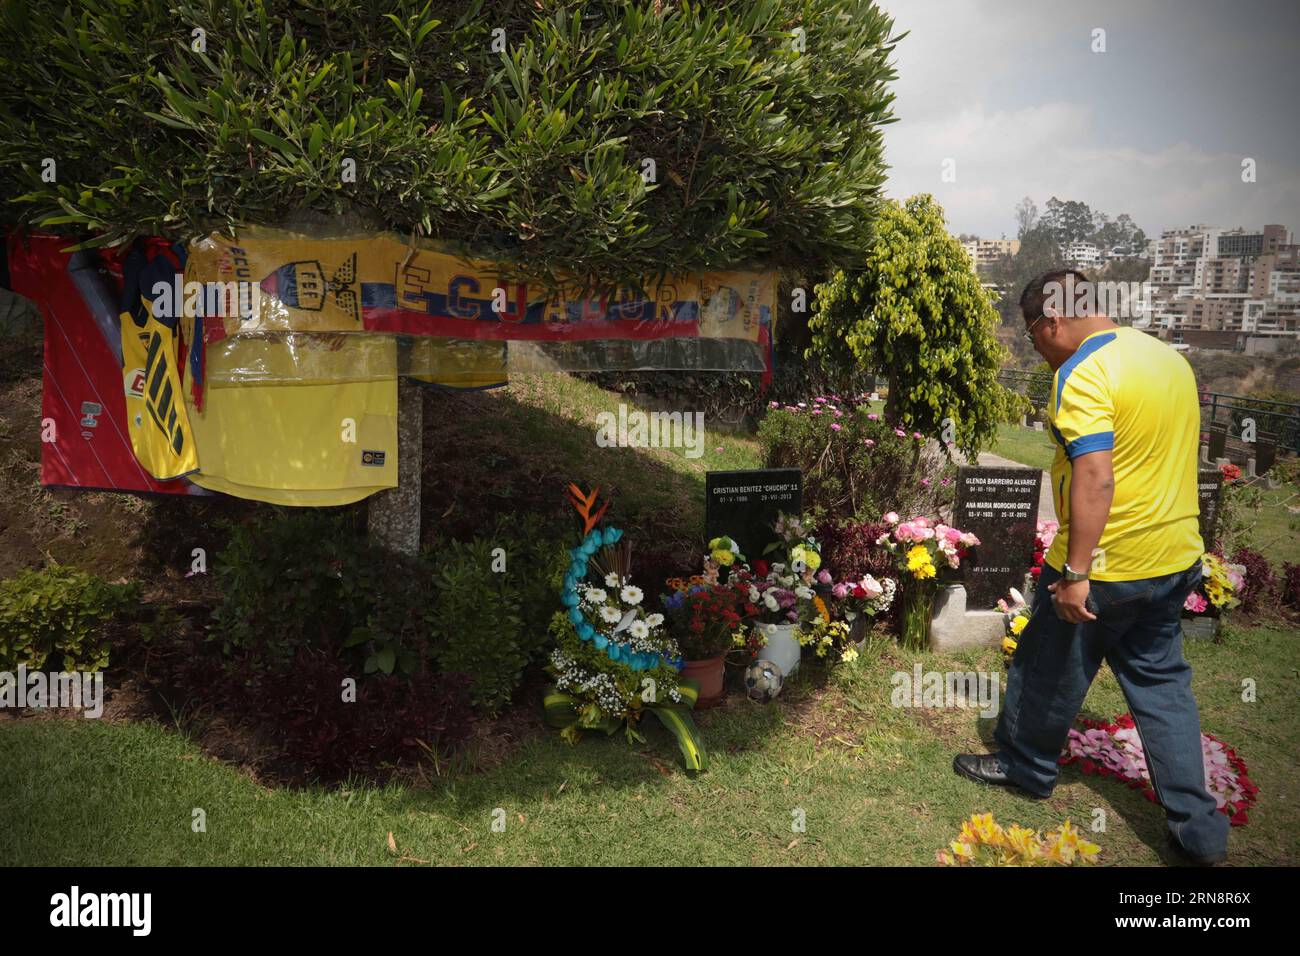 A man watches the tomb of former player of the Ecuadorian national soccer team, Cristian El Chucho Benitez, in commemoration of the Day of the Dead in the cemetery of Mount Olive in Quito city, capital of Ecuador, on Nov. 2, 2015. People go to the cemeteries of the country to visit their dead relatives on occasion of All Saints Day and the Day of the Dead, that are commemorated on Nov. 1 and 2, respectively. ) (da) (sp) ECUADOR-QUITO-ALL SAINTS DAY-DAY OF THE DEAD-COMMEMORATION SANTIAGOxARMAS PUBLICATIONxNOTxINxCHN   a Man Watches The Tomb of Former Player of The Ecuadorian National Soccer Tea Stock Photo